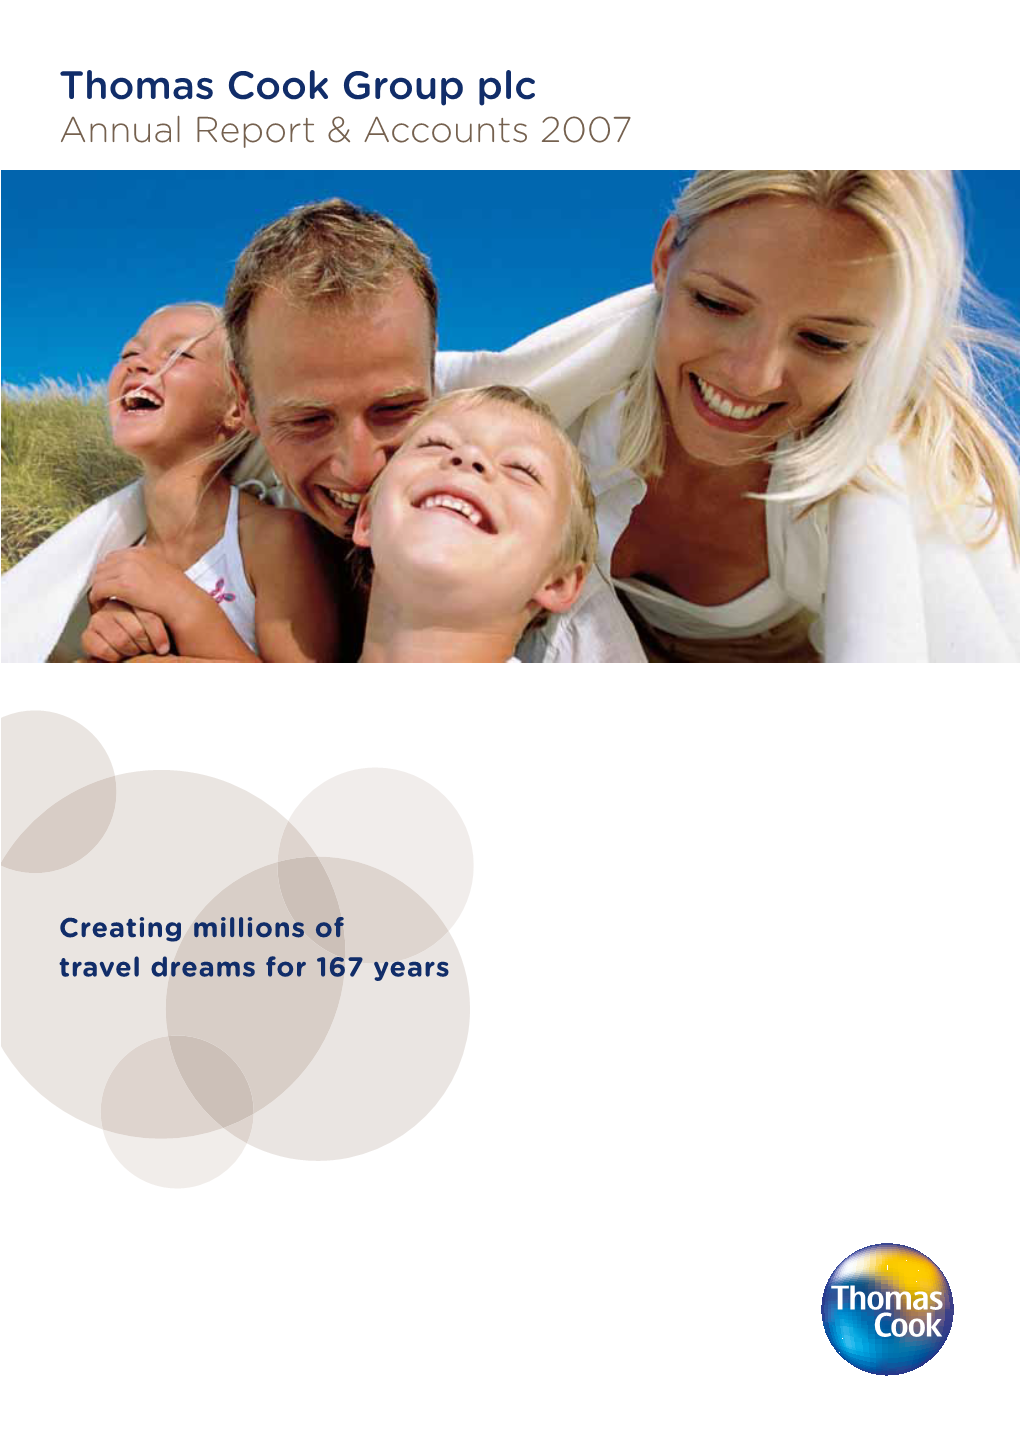 Thomas Cook Group Plc Annual Report & Accounts 2007